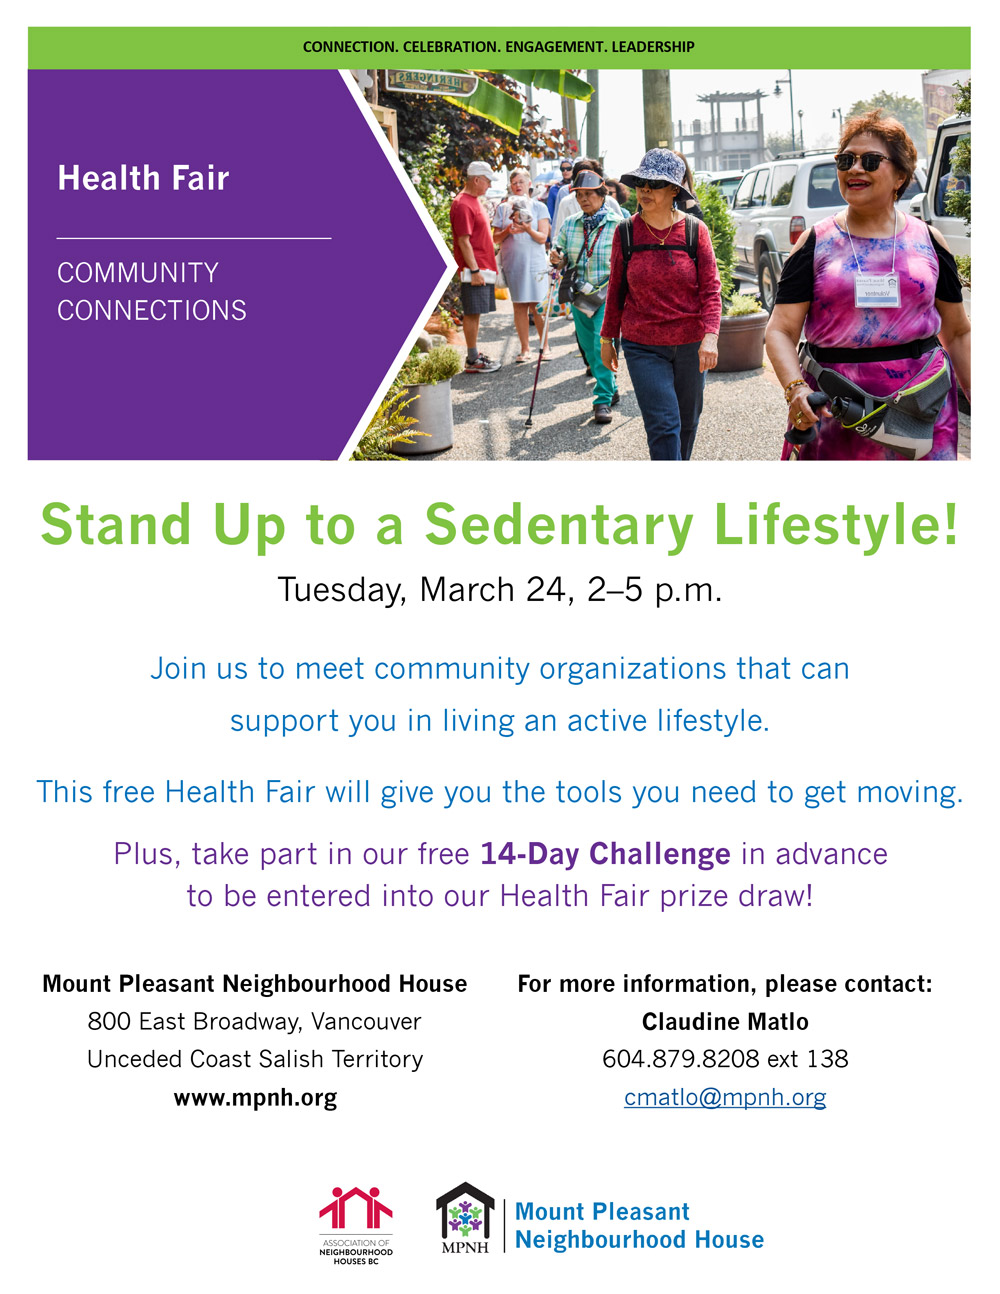 Poster for the Health Fair showing senior women smiling taking an active walk